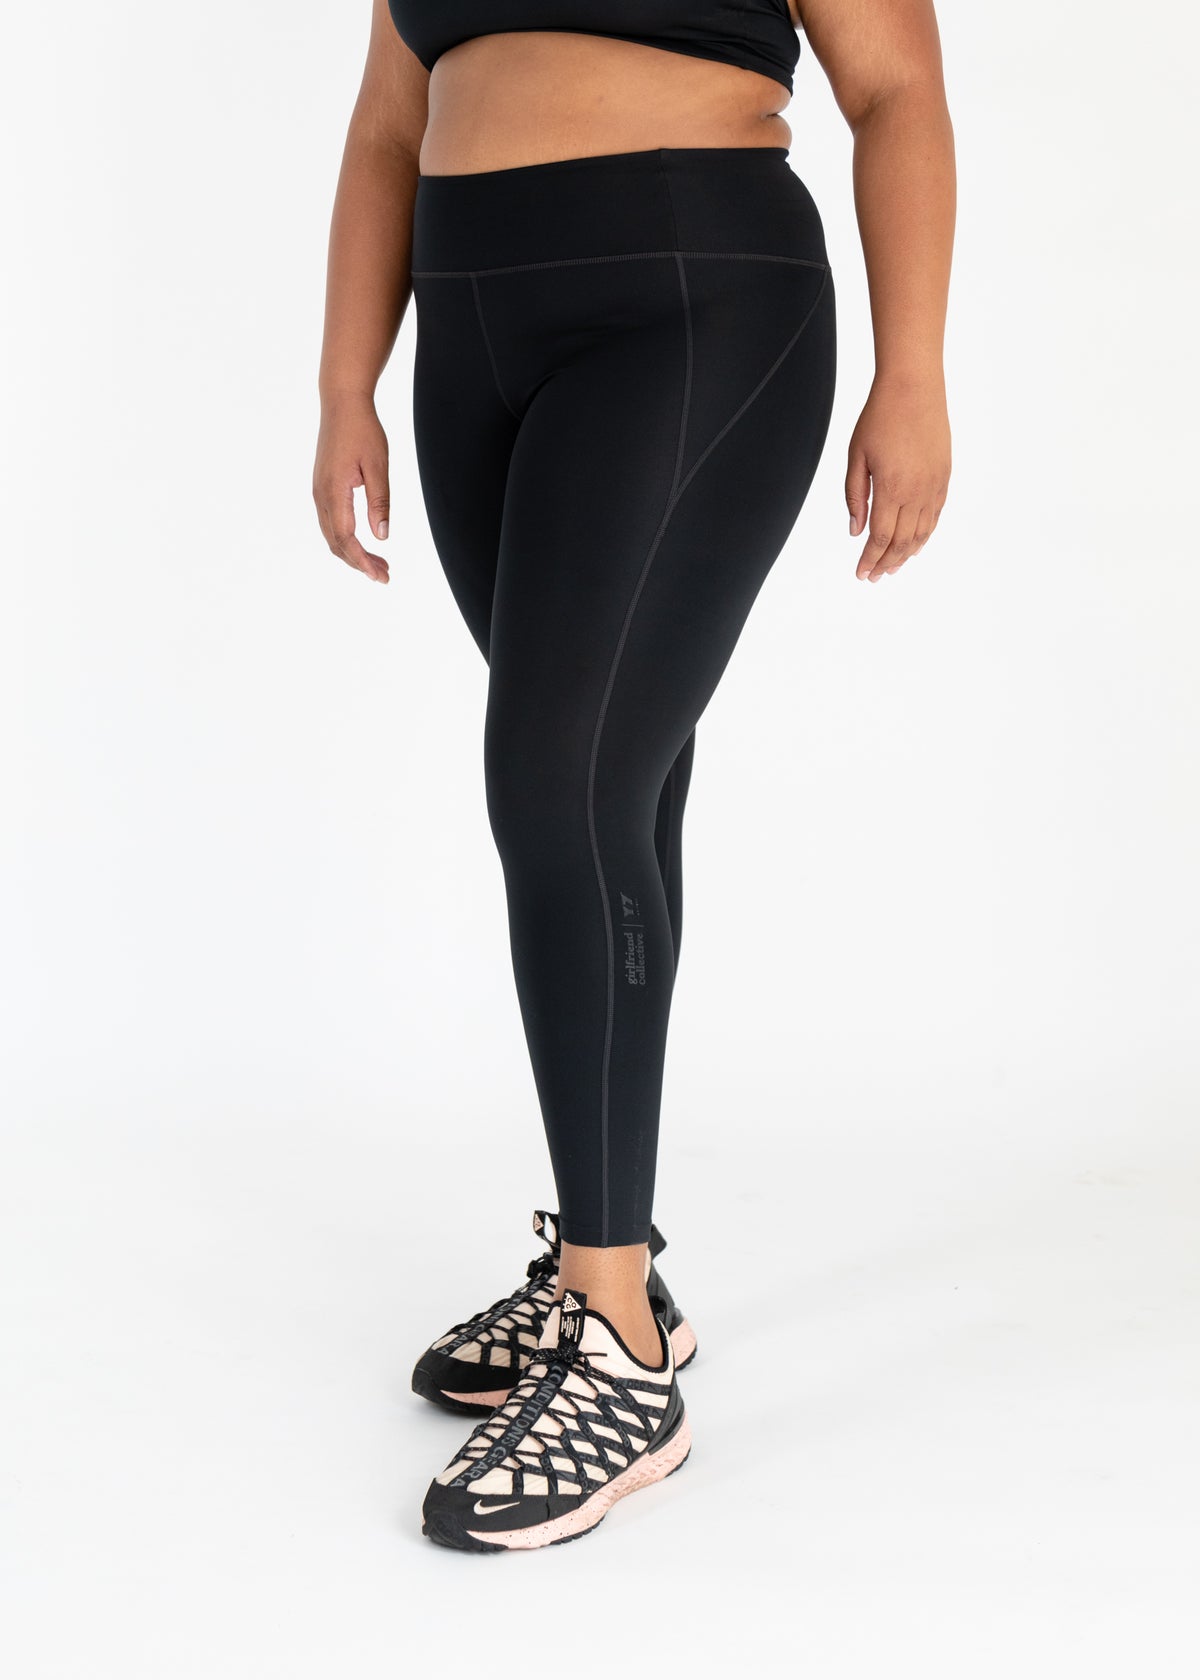 Black compressive high-rise raise up total look